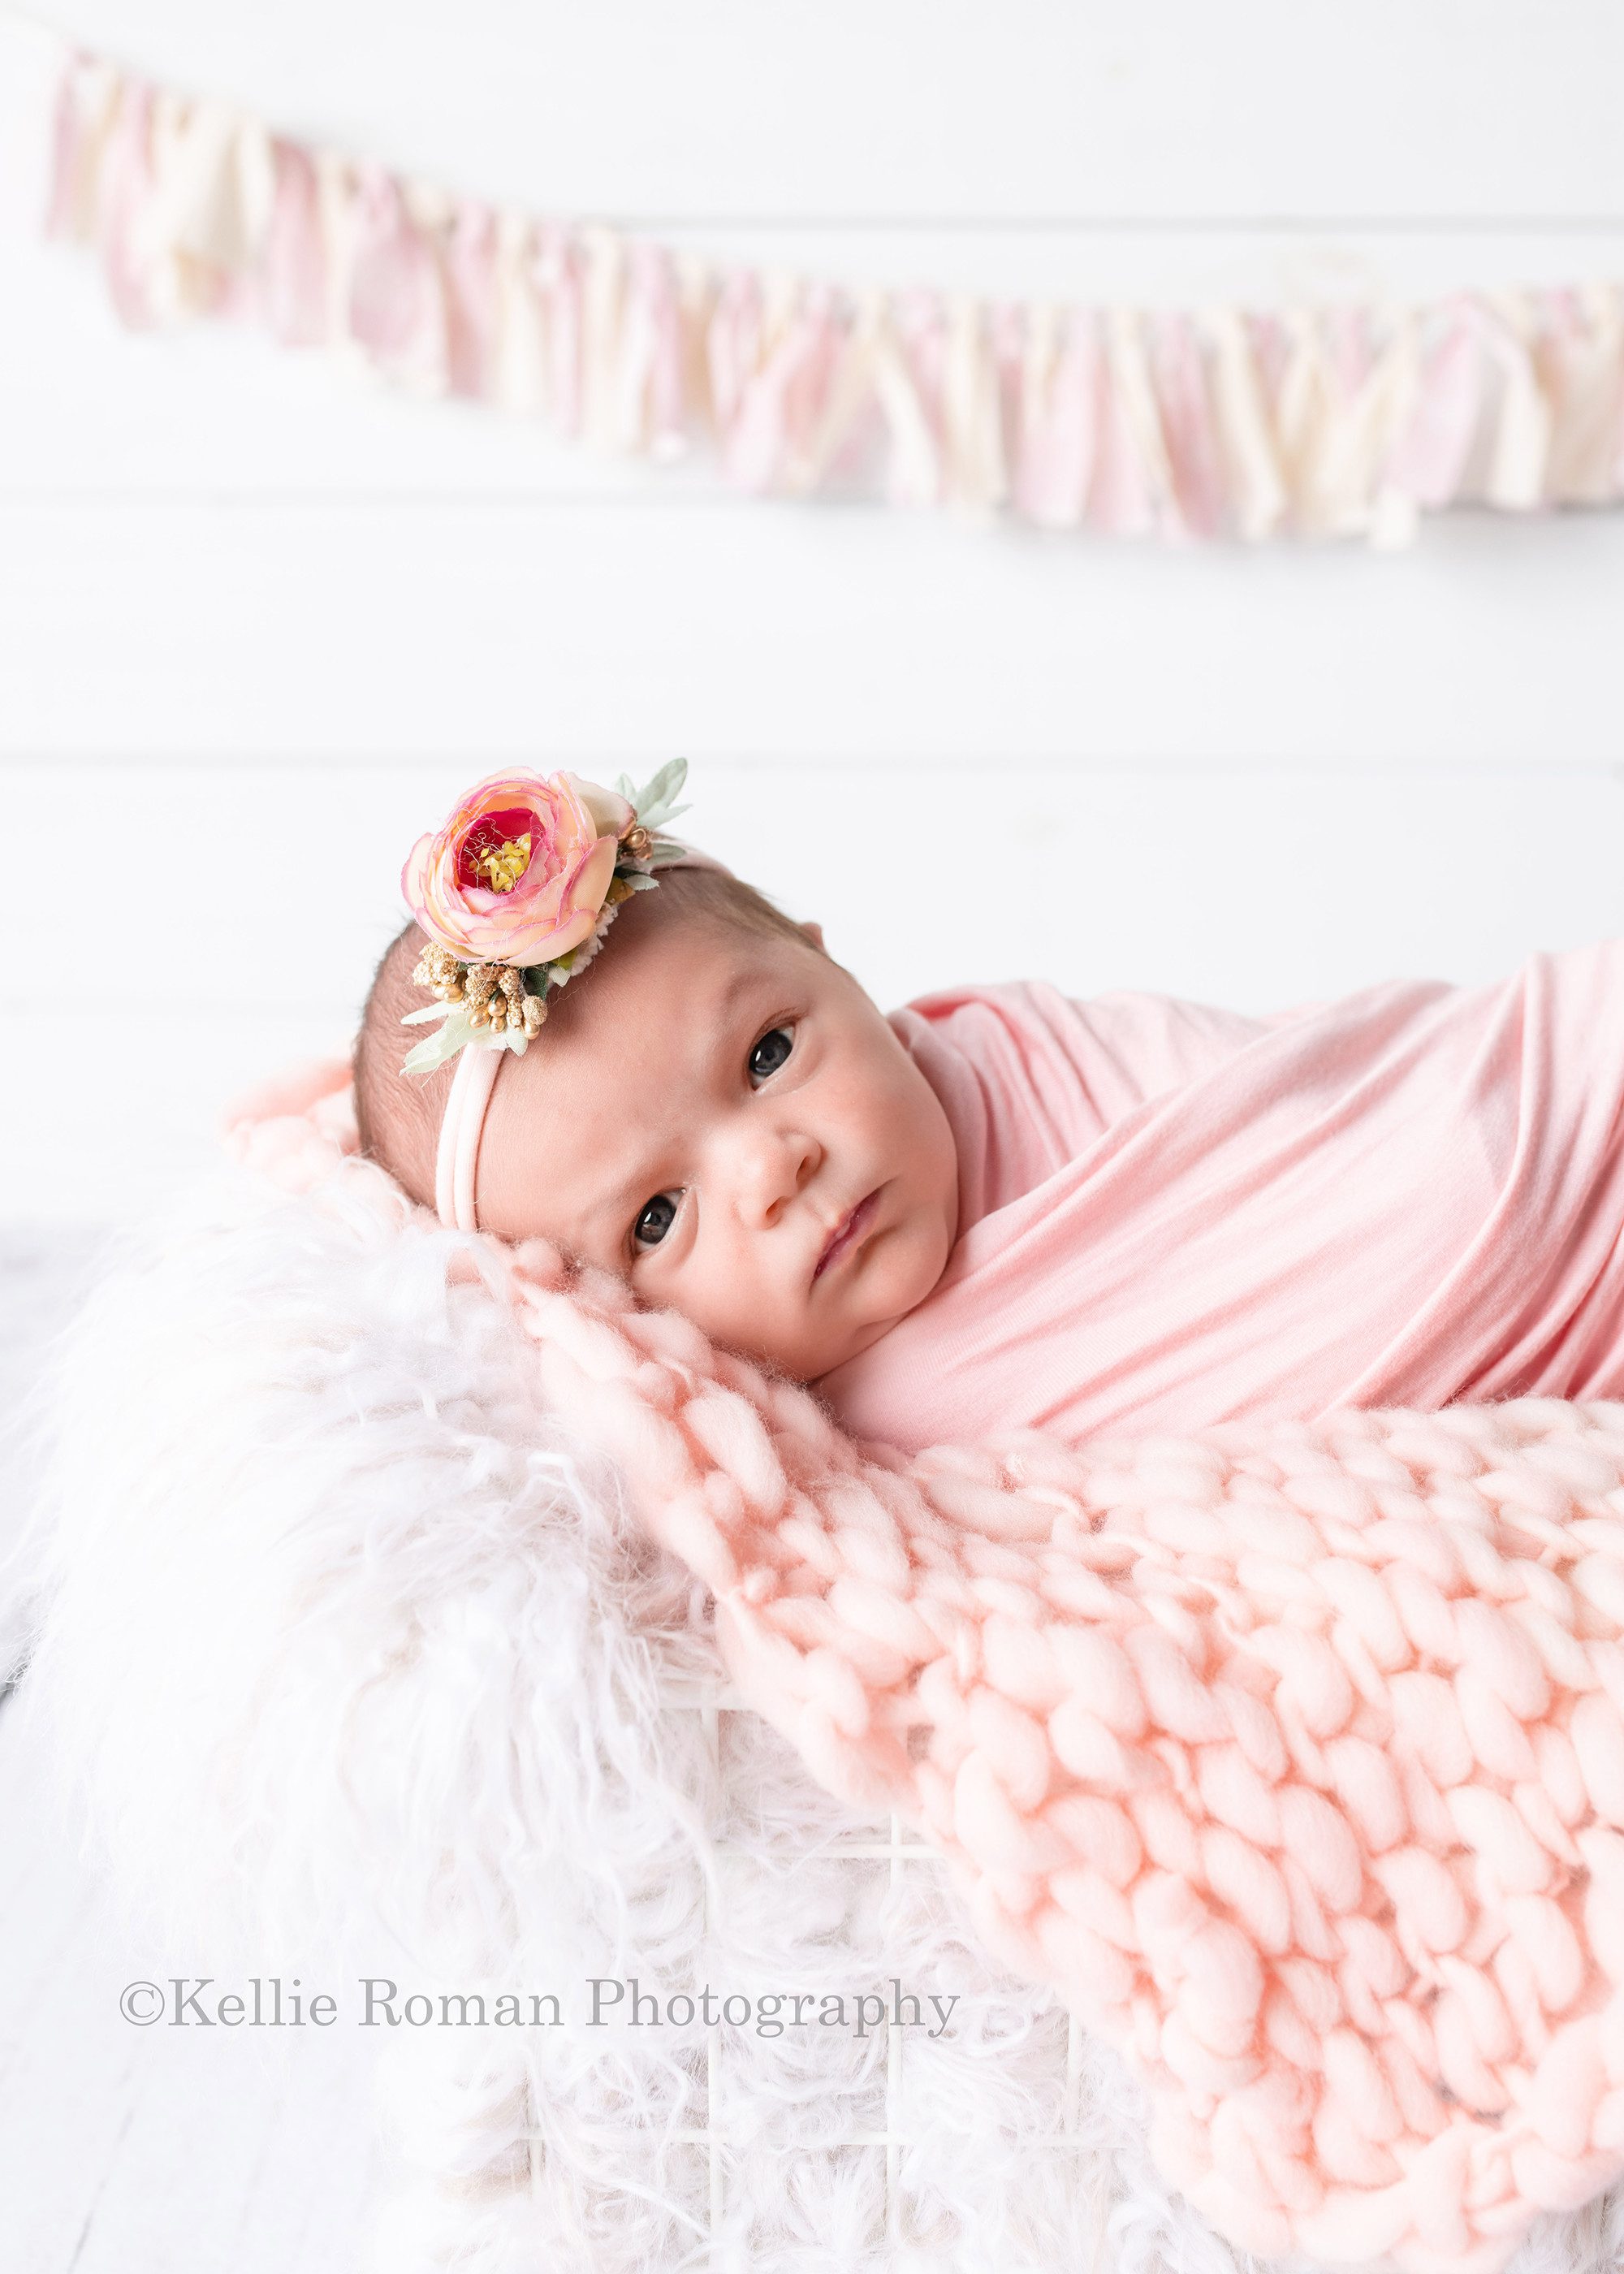 milwaukee studio newborn photographer. A infant baby girl is in a milwaukee photographers studio in greendale Wisconsin. The baby is wrapped in a light pink swaddle fabric, and is laying in a white wire crate filled with white fur and a pink knitted blanket. The baby girl has a flower headband on and is awake looking into the camera.